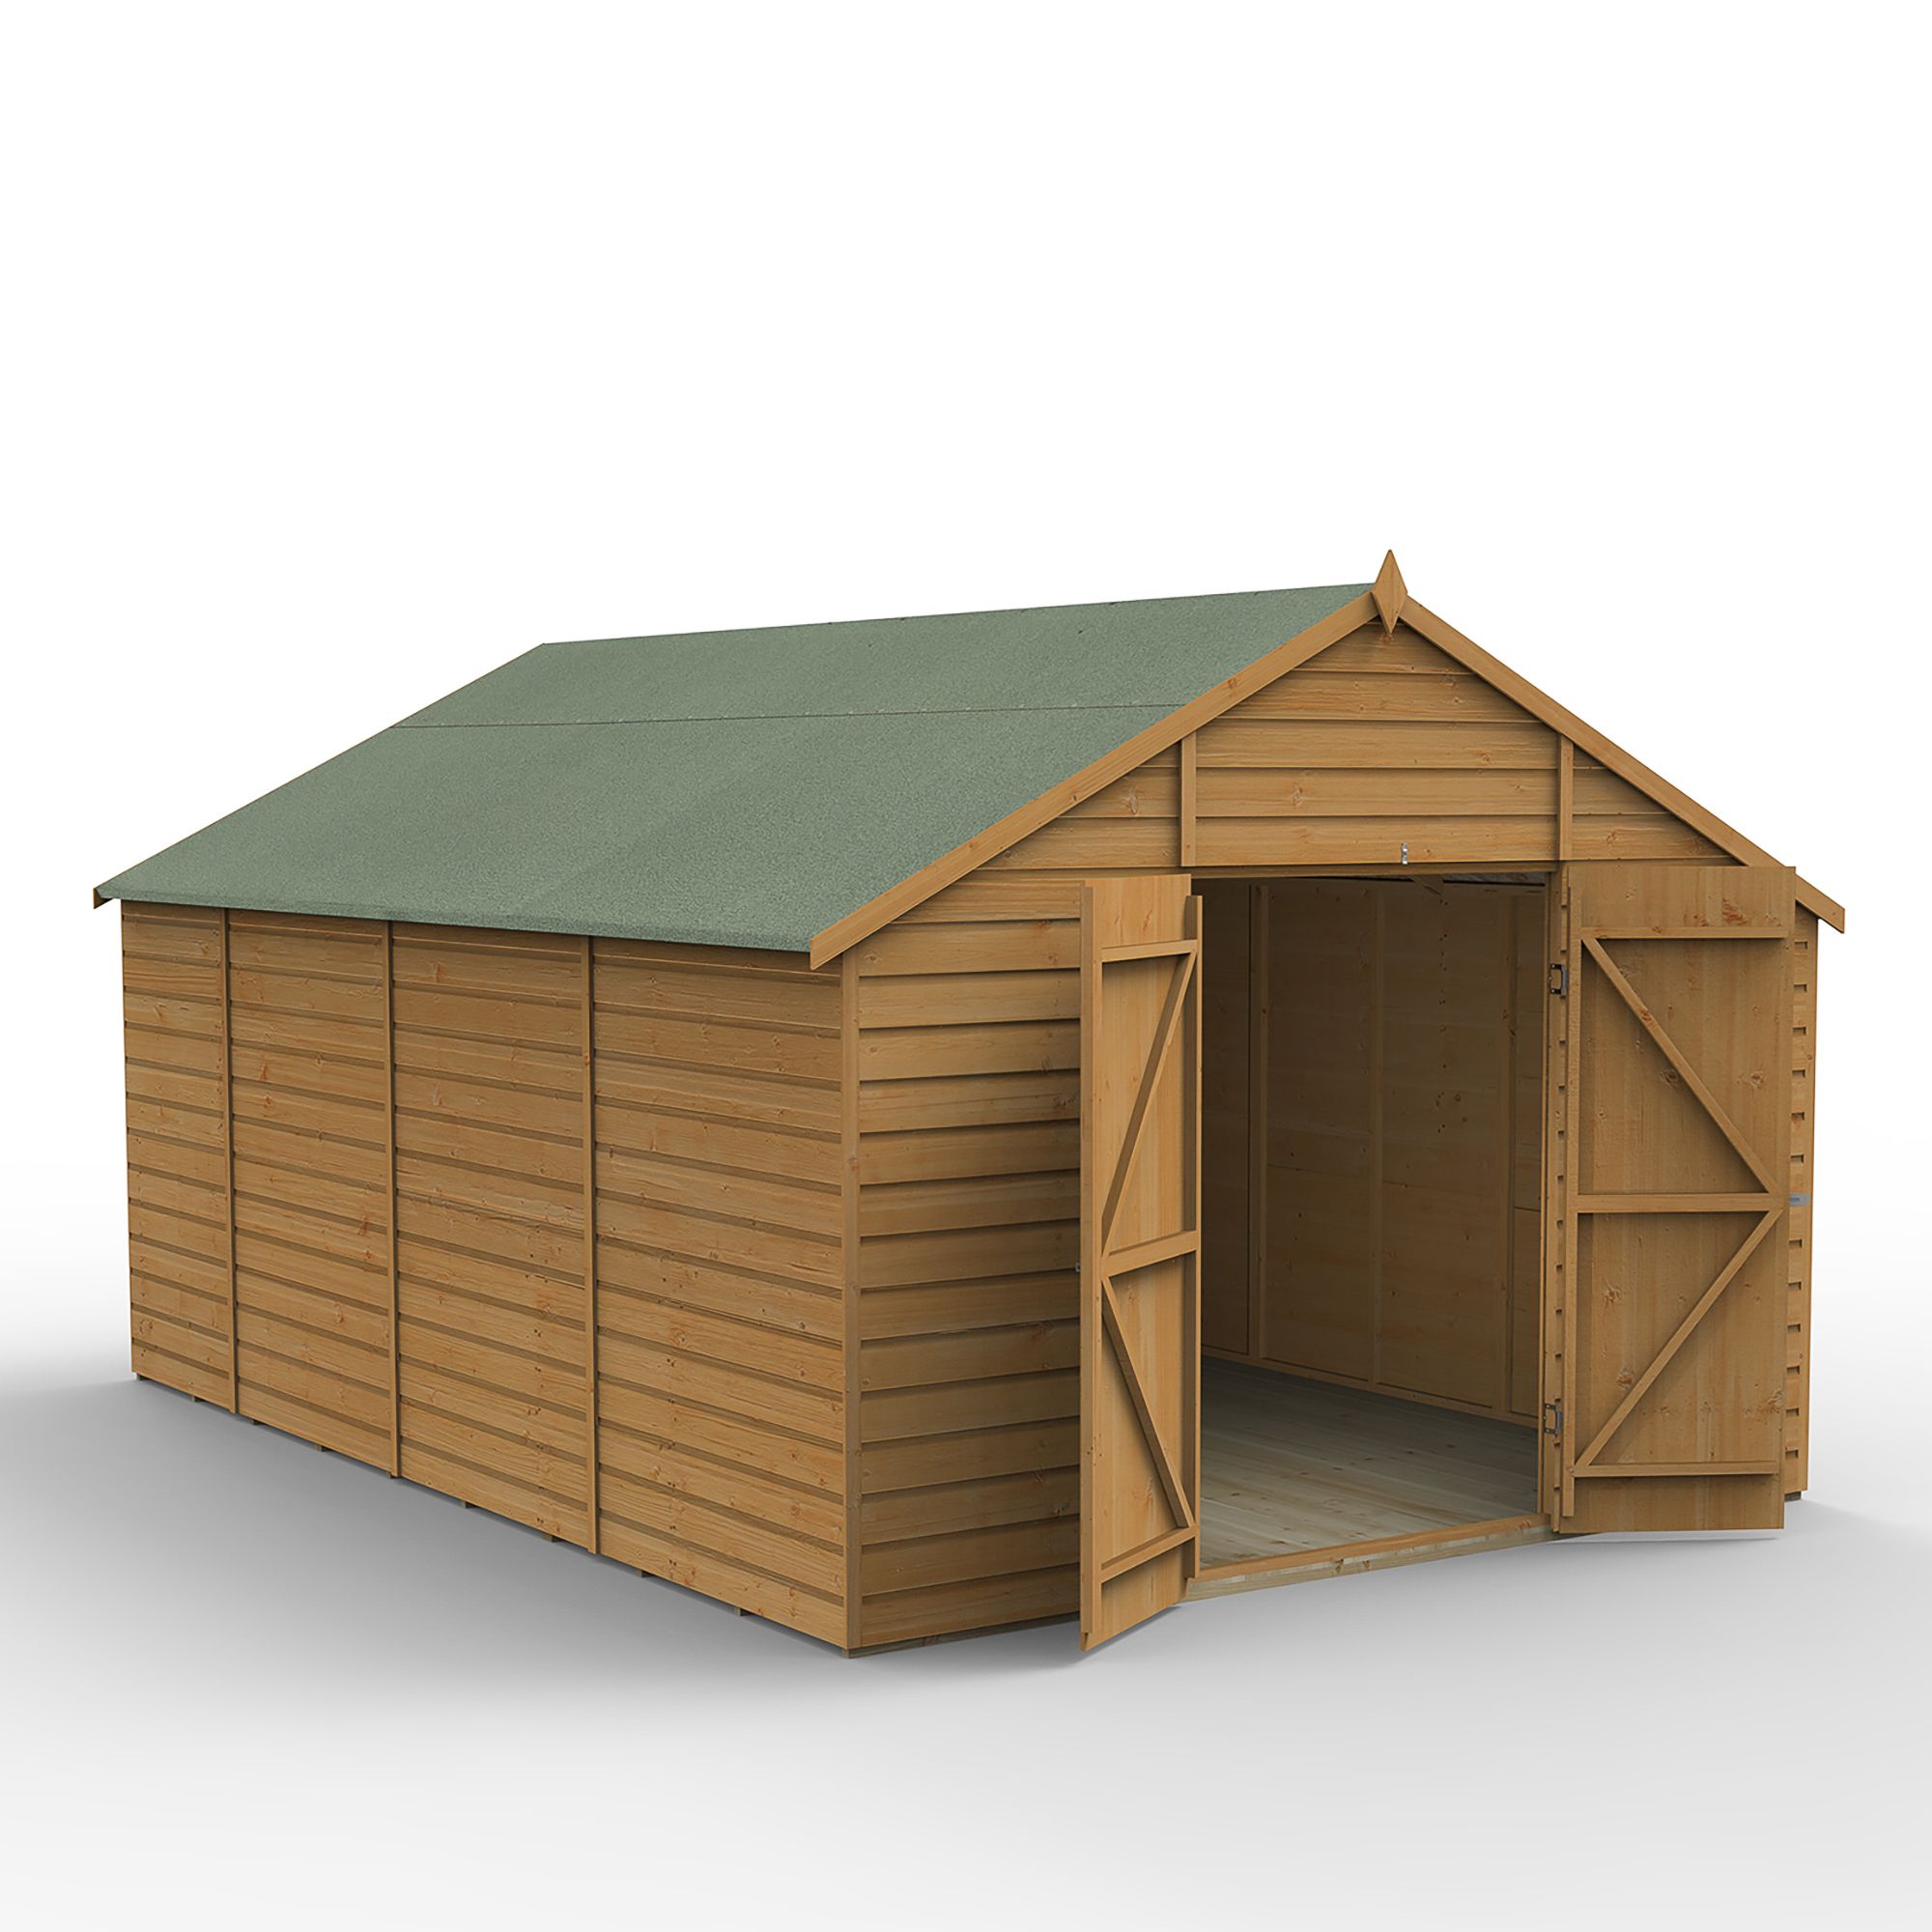 Forest Garden 10x15 ft Apex Wooden 2 door Shed with floor (Base included) - Assembly service included